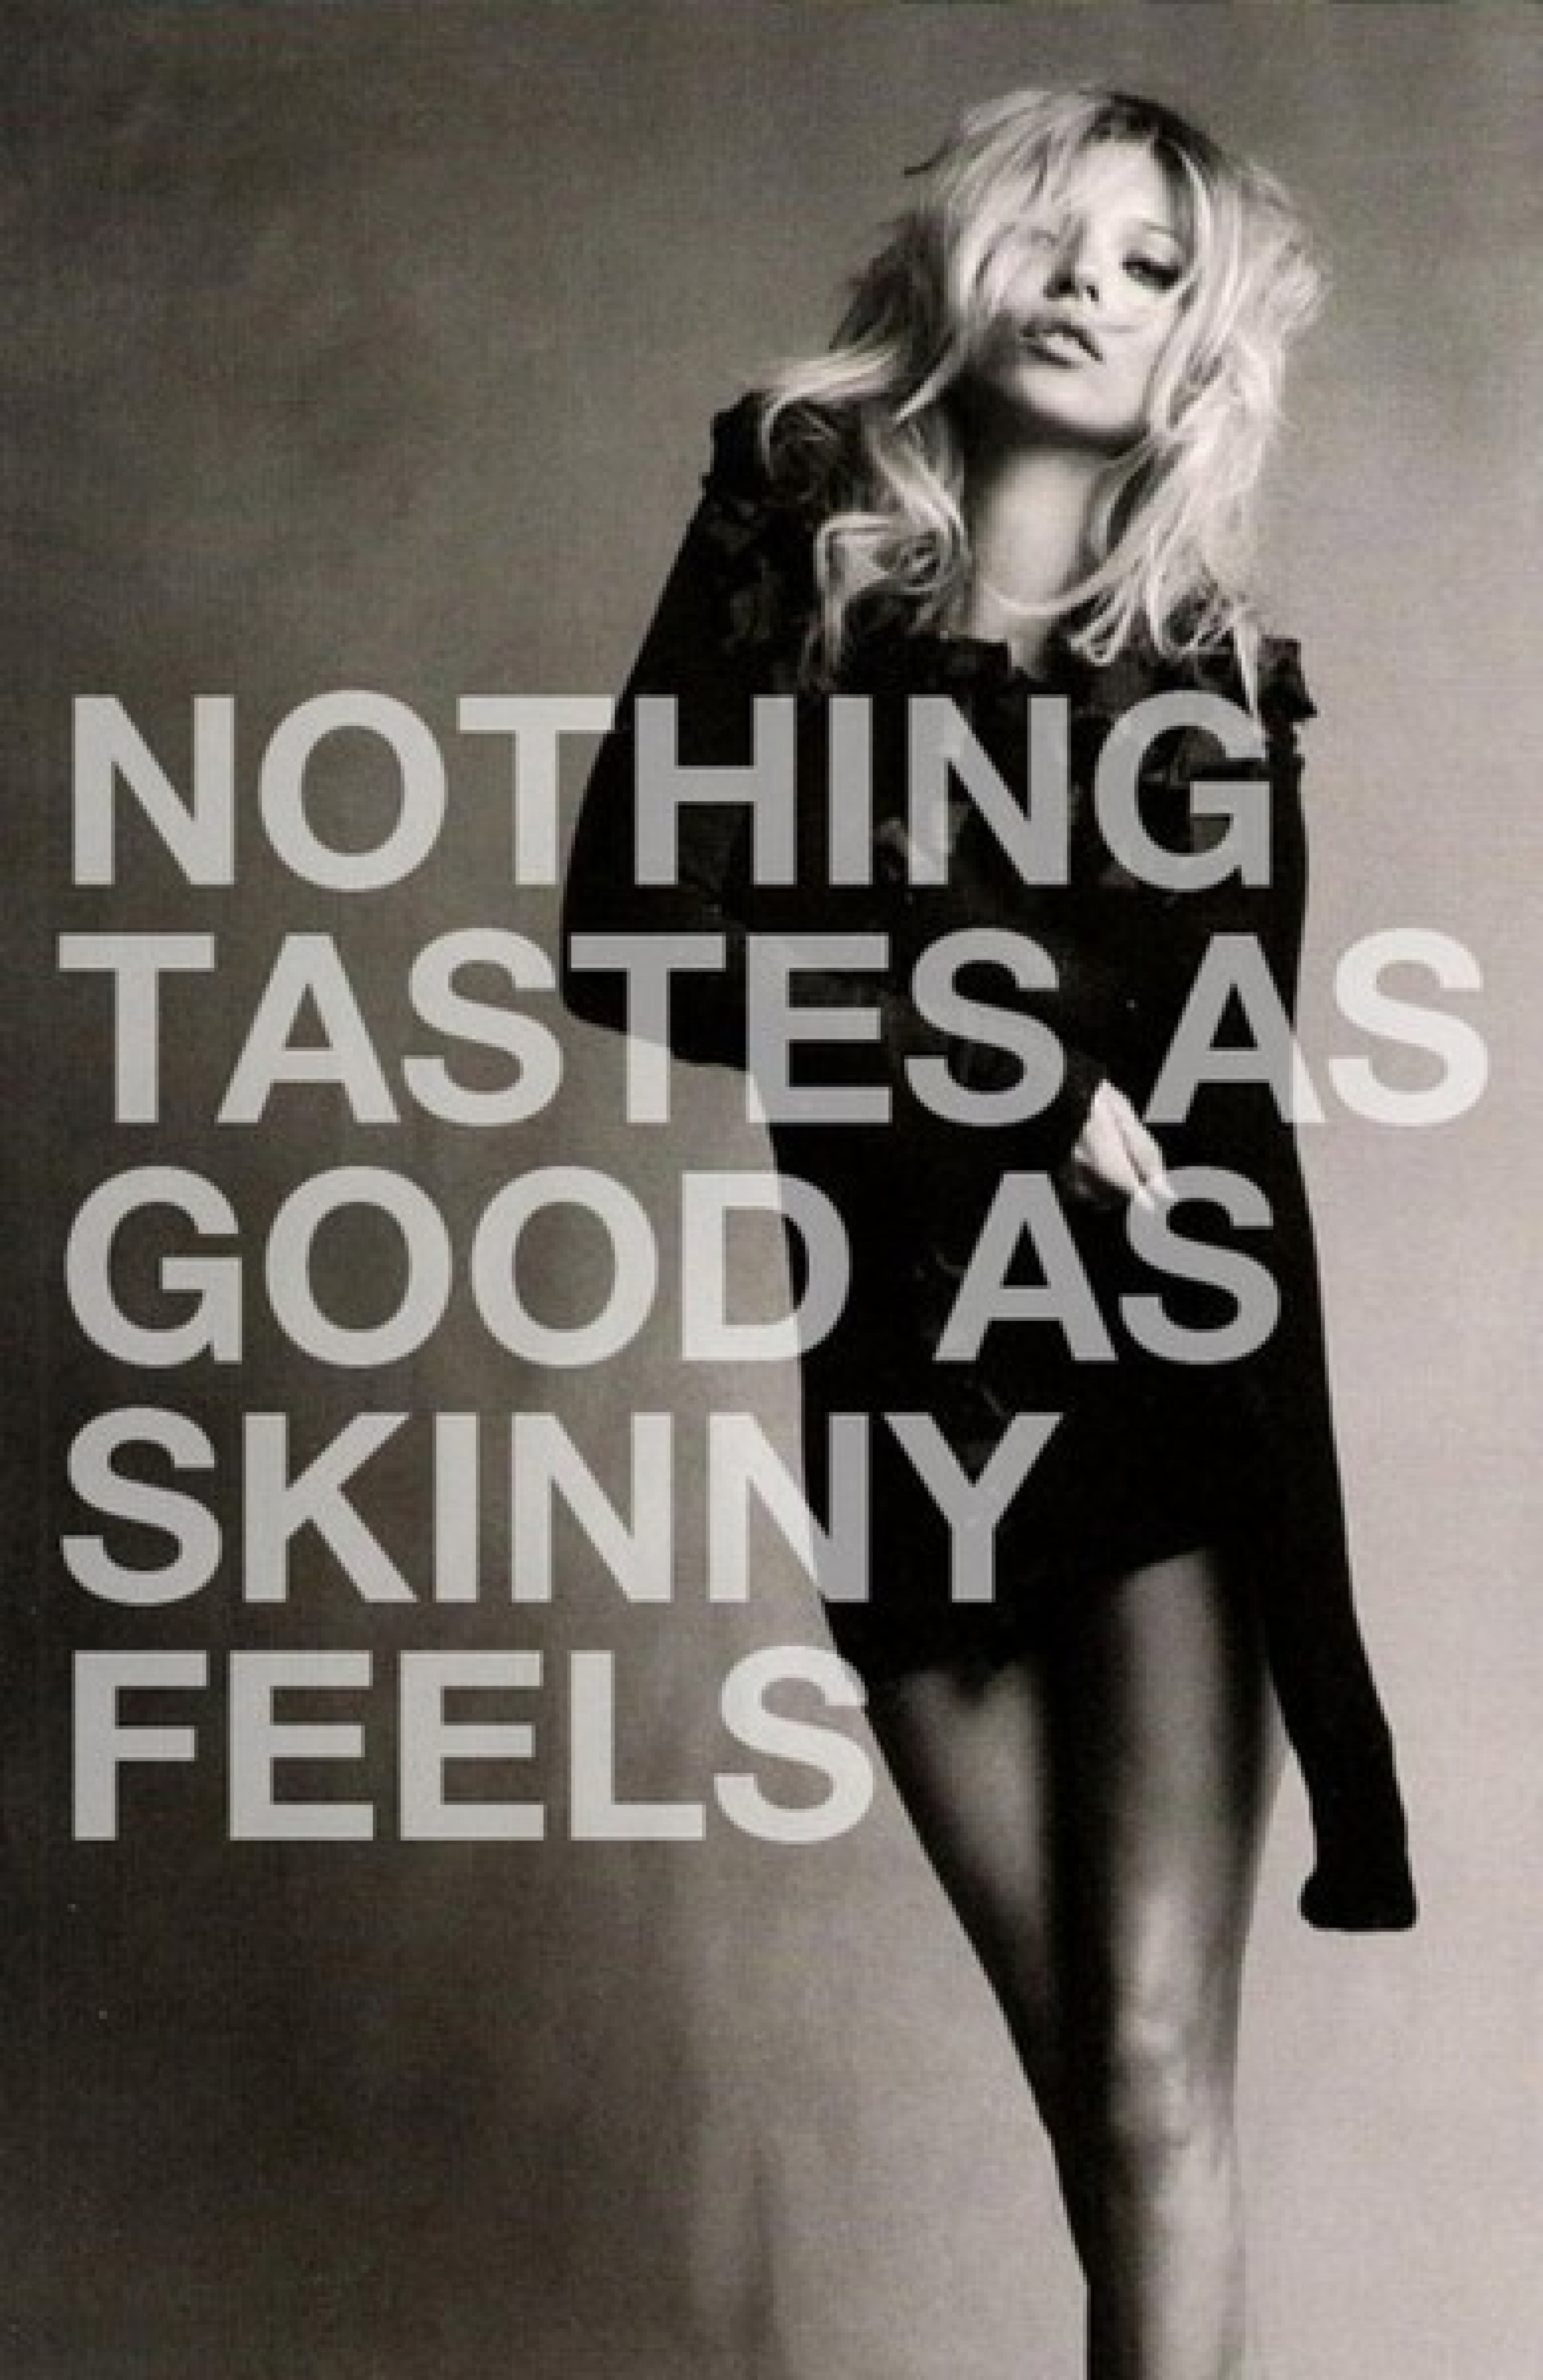 Thinspiration Debate Over Pro Anorexia Thinspo Pictures On Pinterest Tumblr Heats Up After